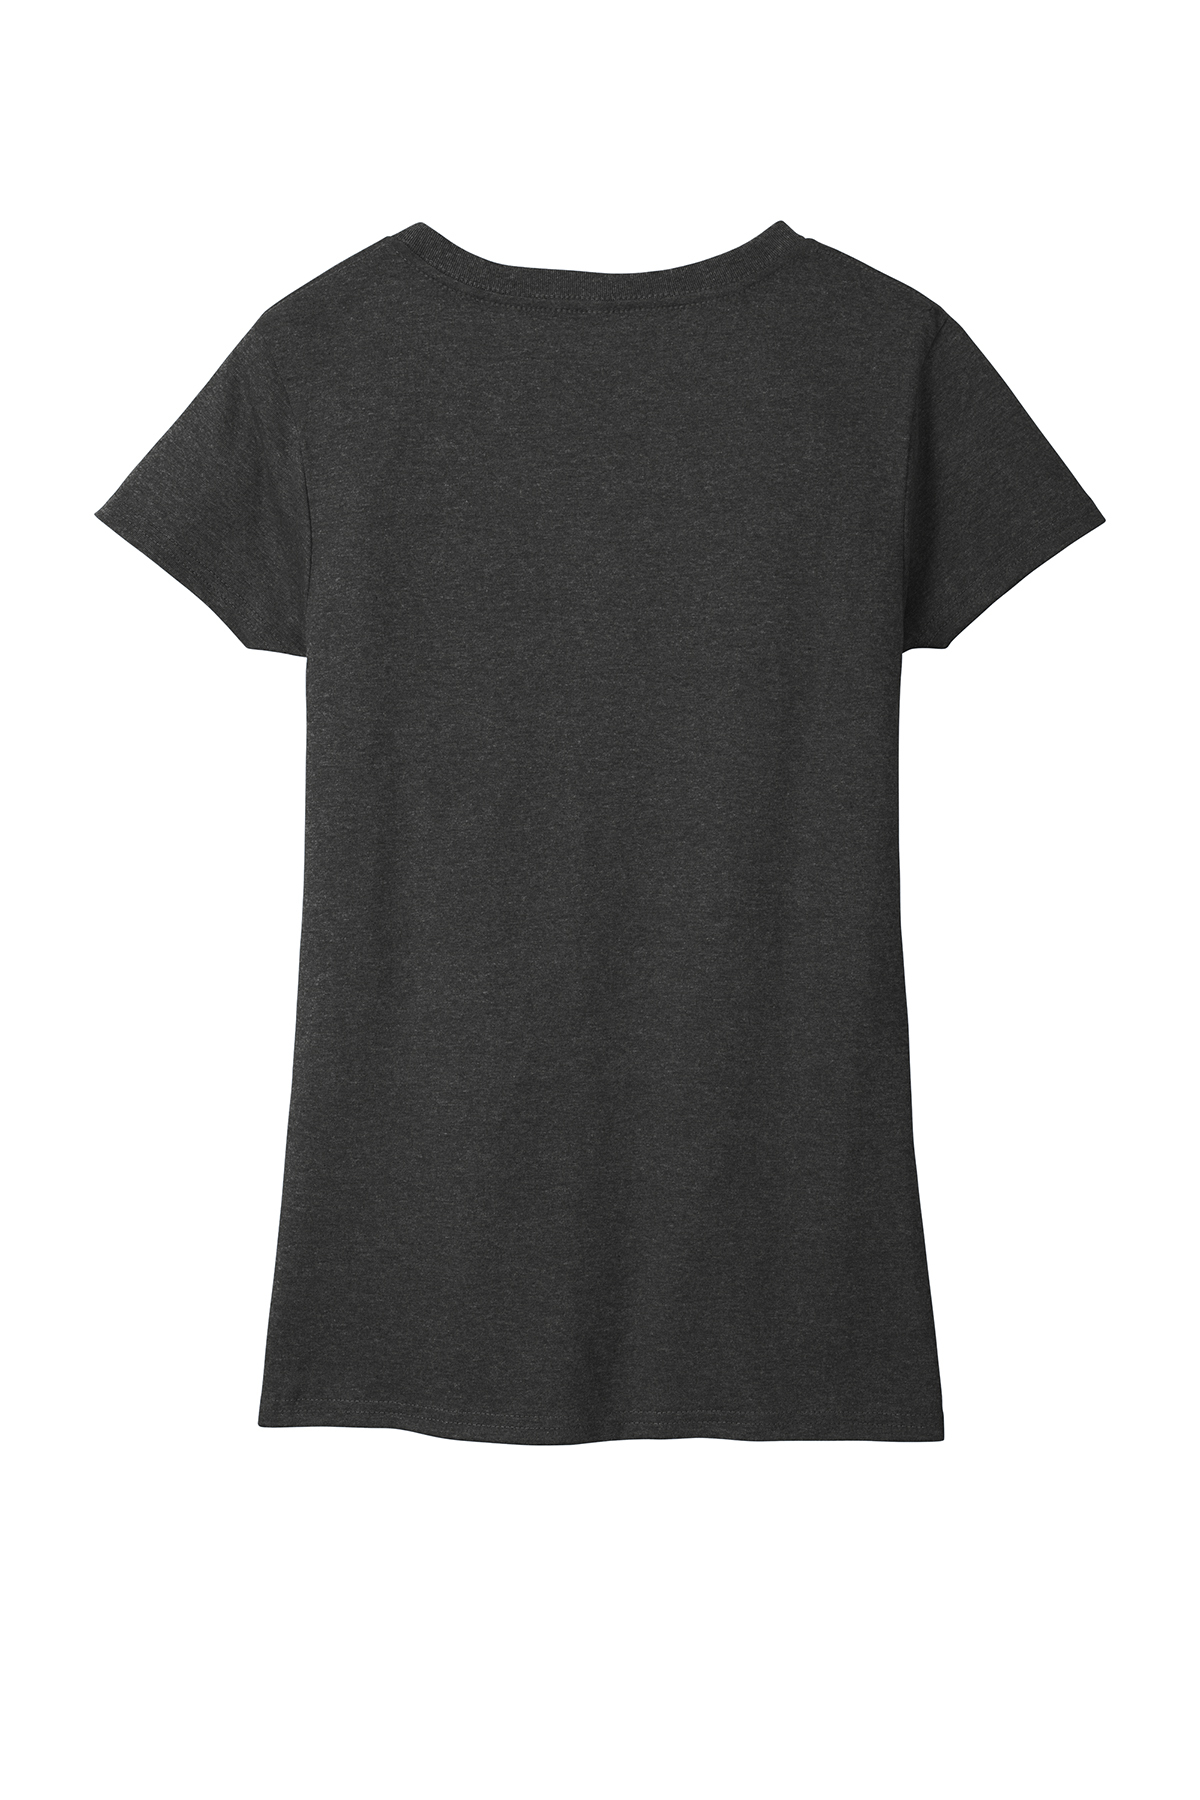 District Women’s Re-Tee V-Neck | Product | District